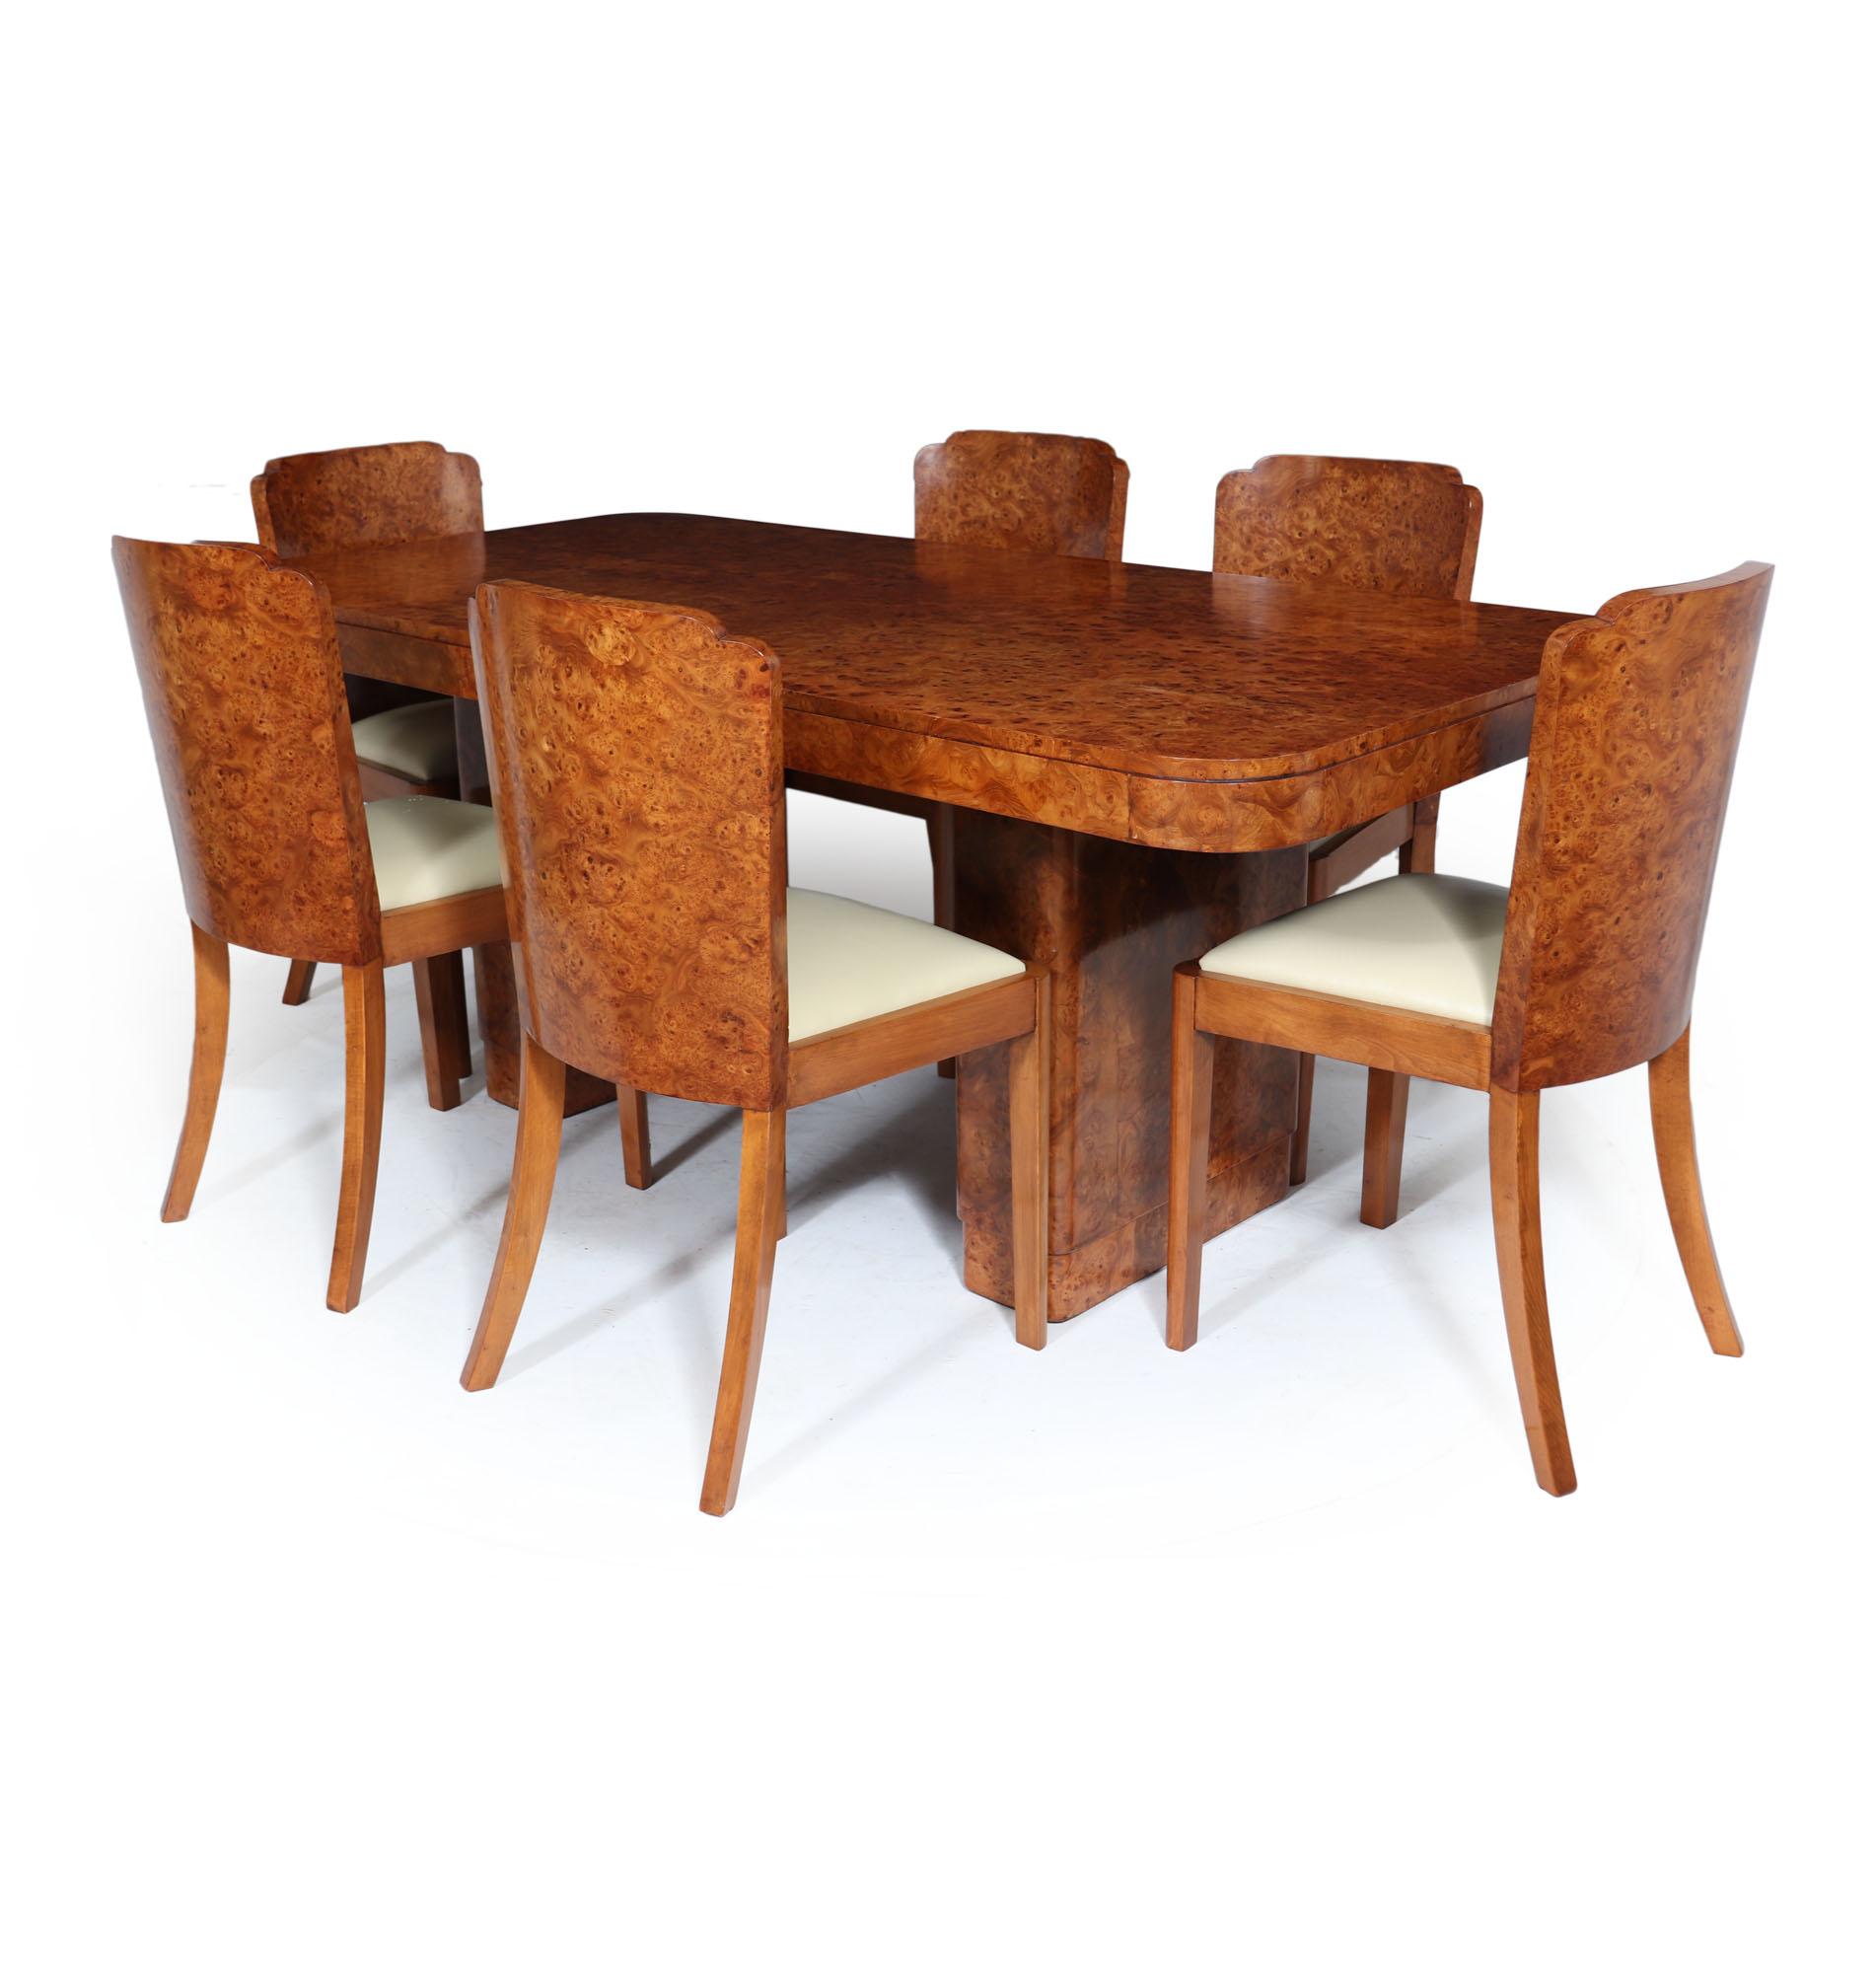 Art Deco dining table and chairs
An English Art Deco suite consisting of a twin pedestal table and set of six curved back dining chairs, produced in England in the 1930’s and having exceptional burr walnut veneers the table has two removable